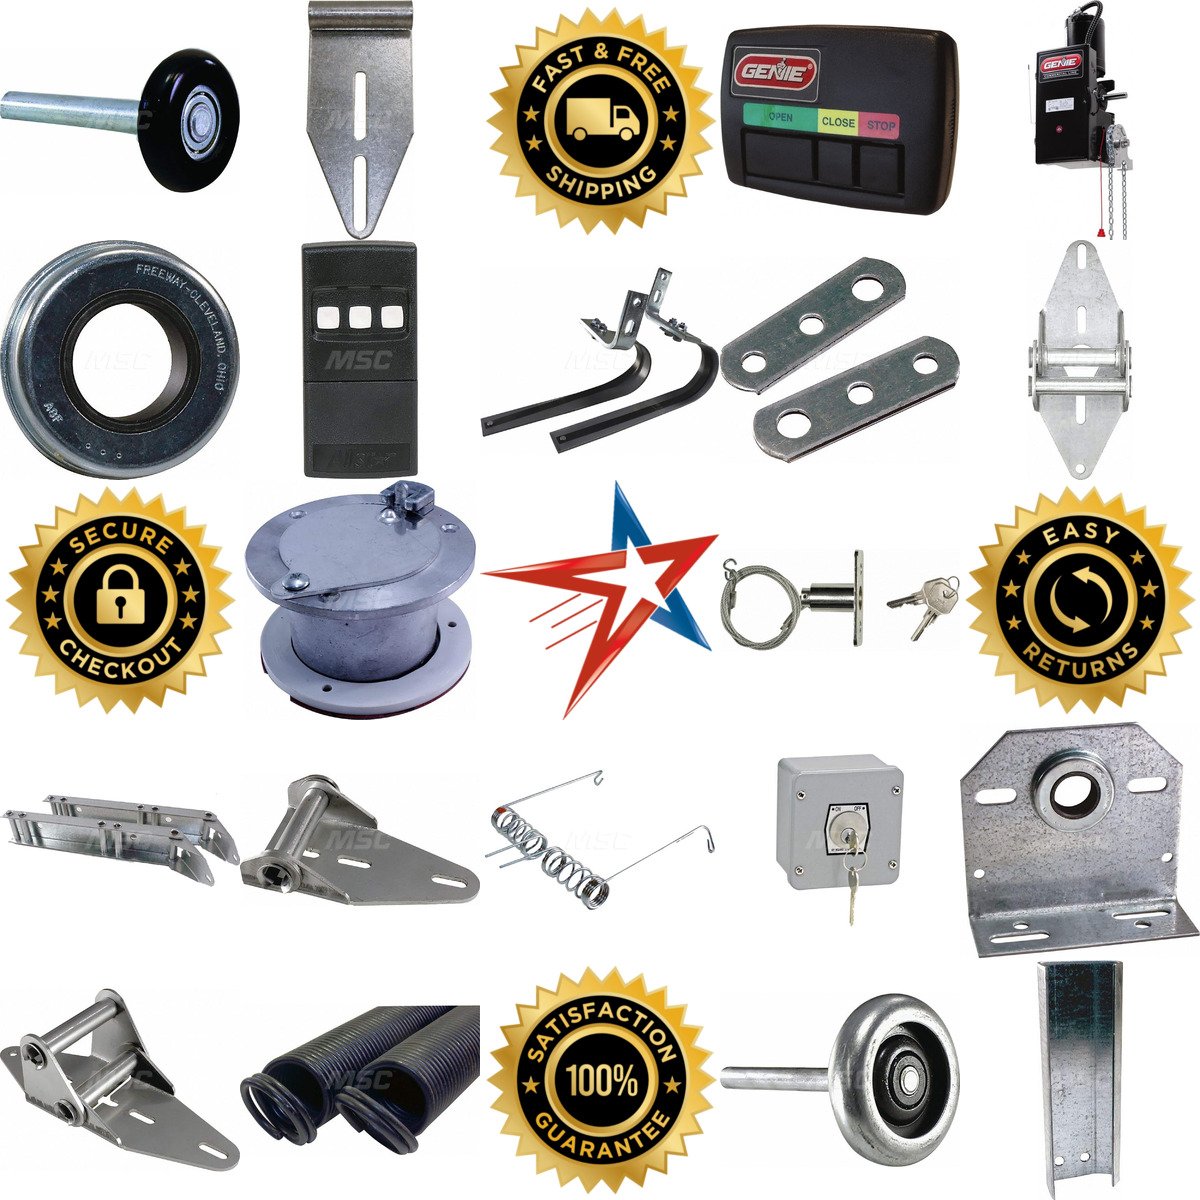 A selection of Garage Door Hardware products on GoVets